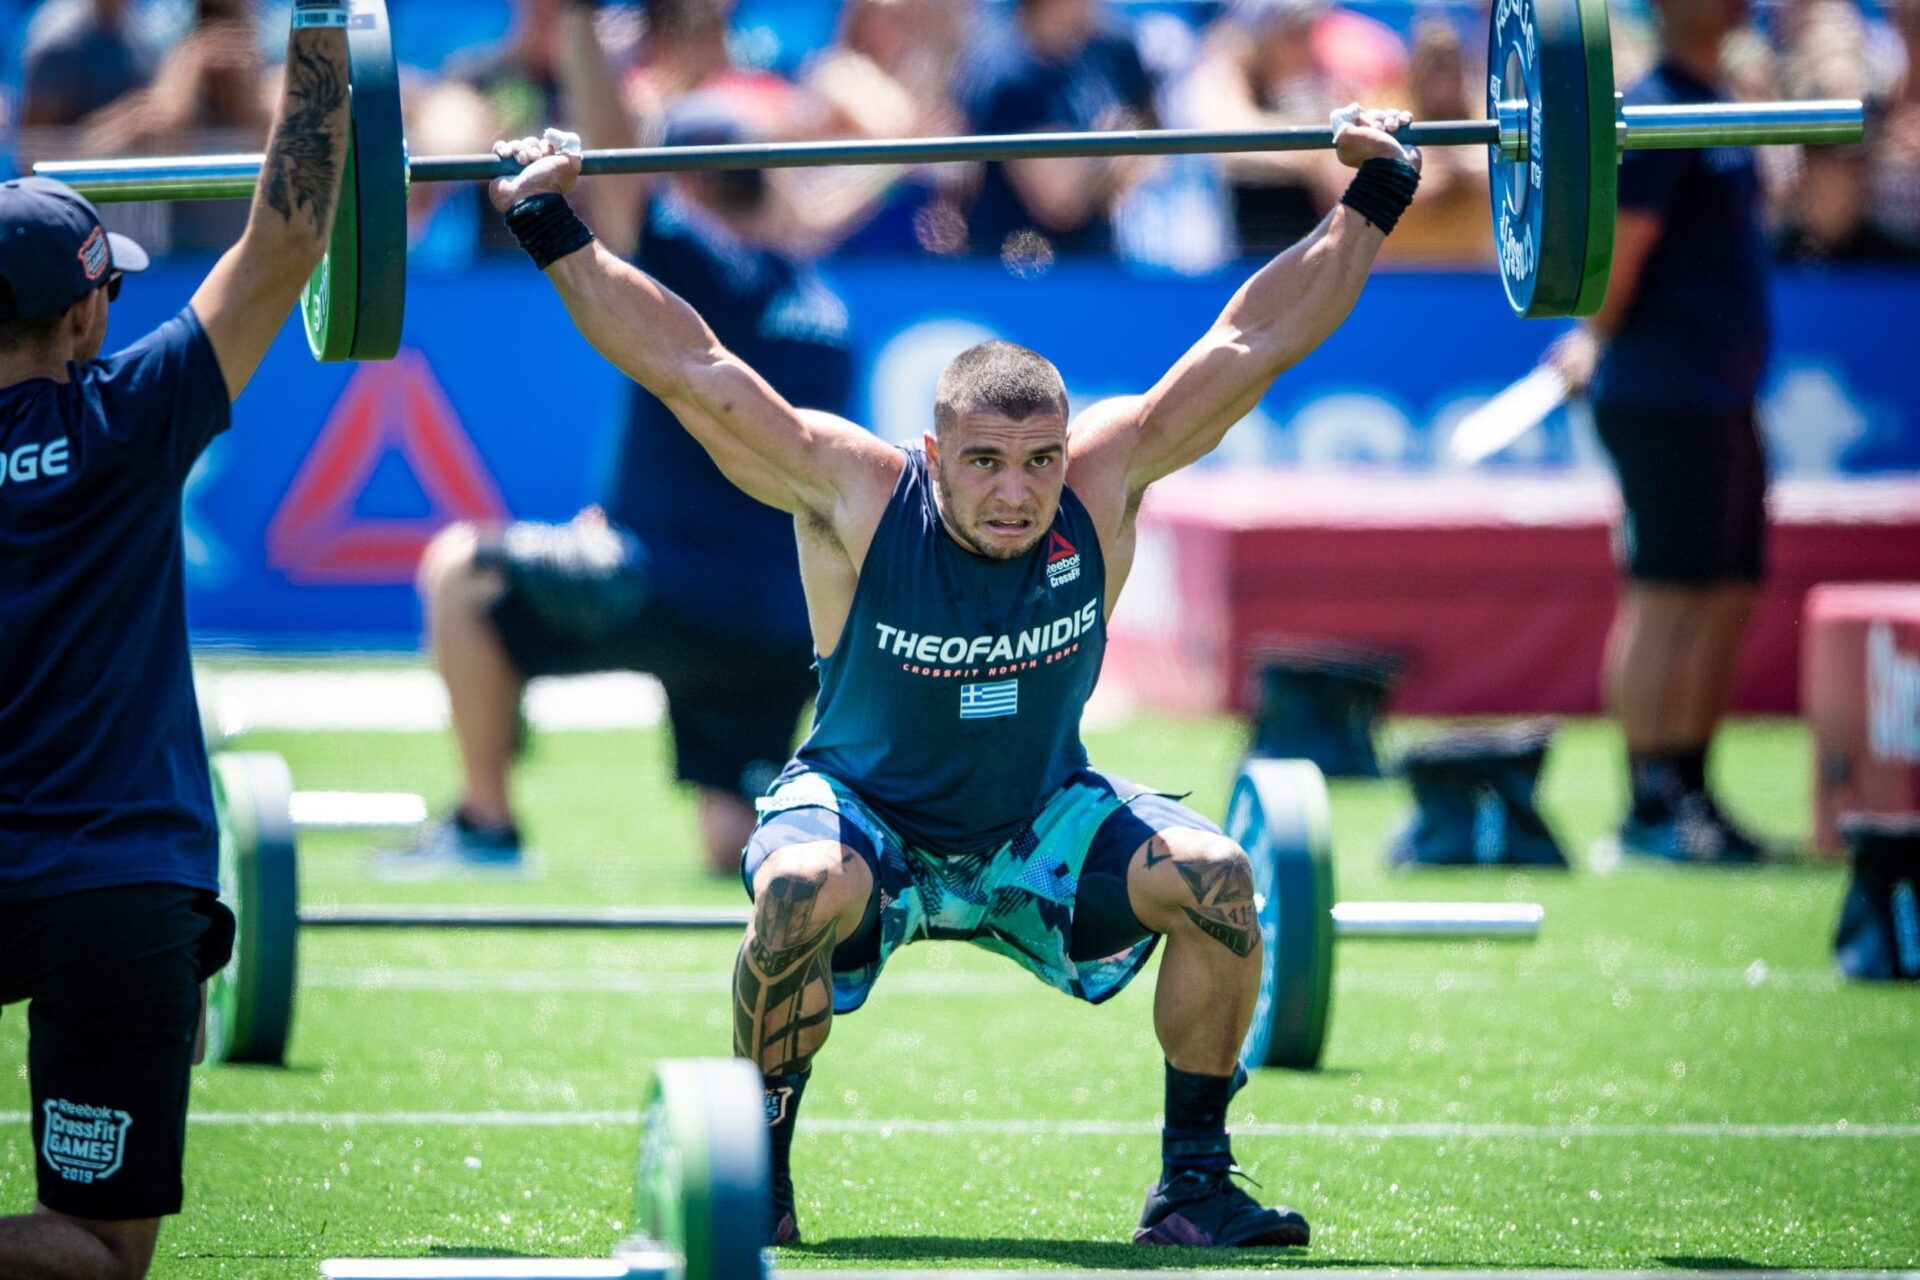 CrossFit Games Athlete and 3rd Place Open 2020 Finisher tests Positive